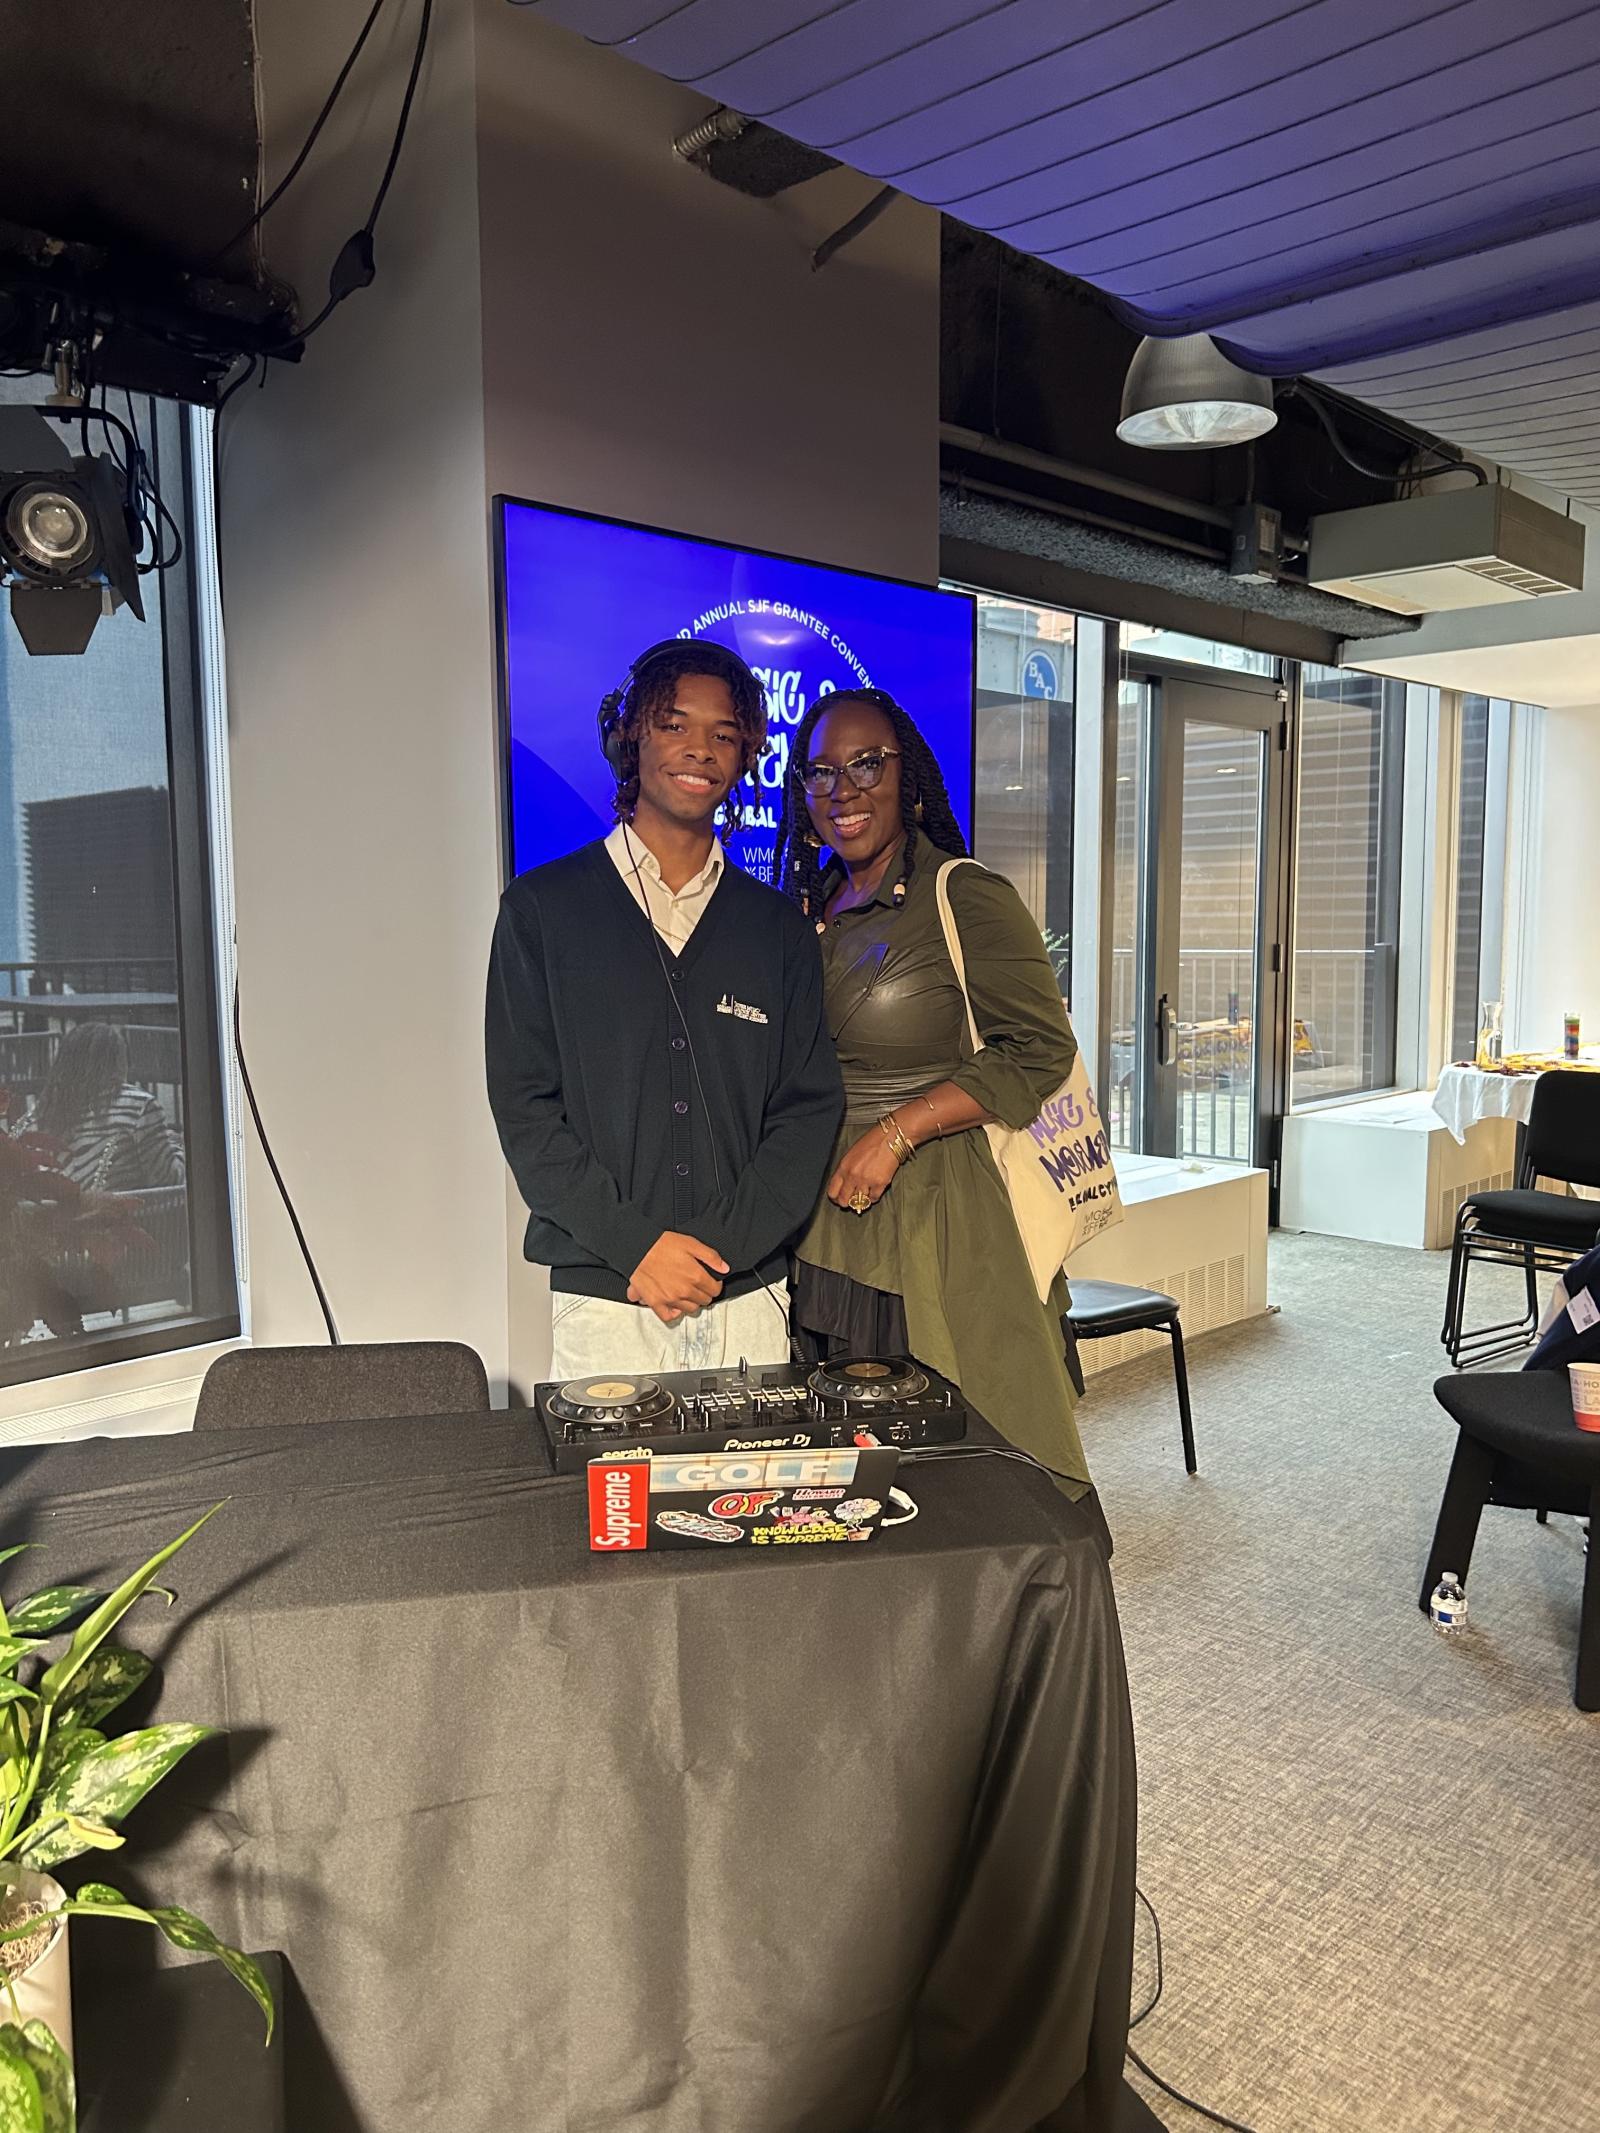 Deejay-in-residence fellow Marcellus Williams aka DJ Mar and hip-hop ambassador Toni Blackman (B.A. ’91) pose together during day 2 of The Warner Music Group / Blavatnik Family Foundation Social Justice Fund (WMG/BFF SJF) pose together. (Source: Warner Music Group)